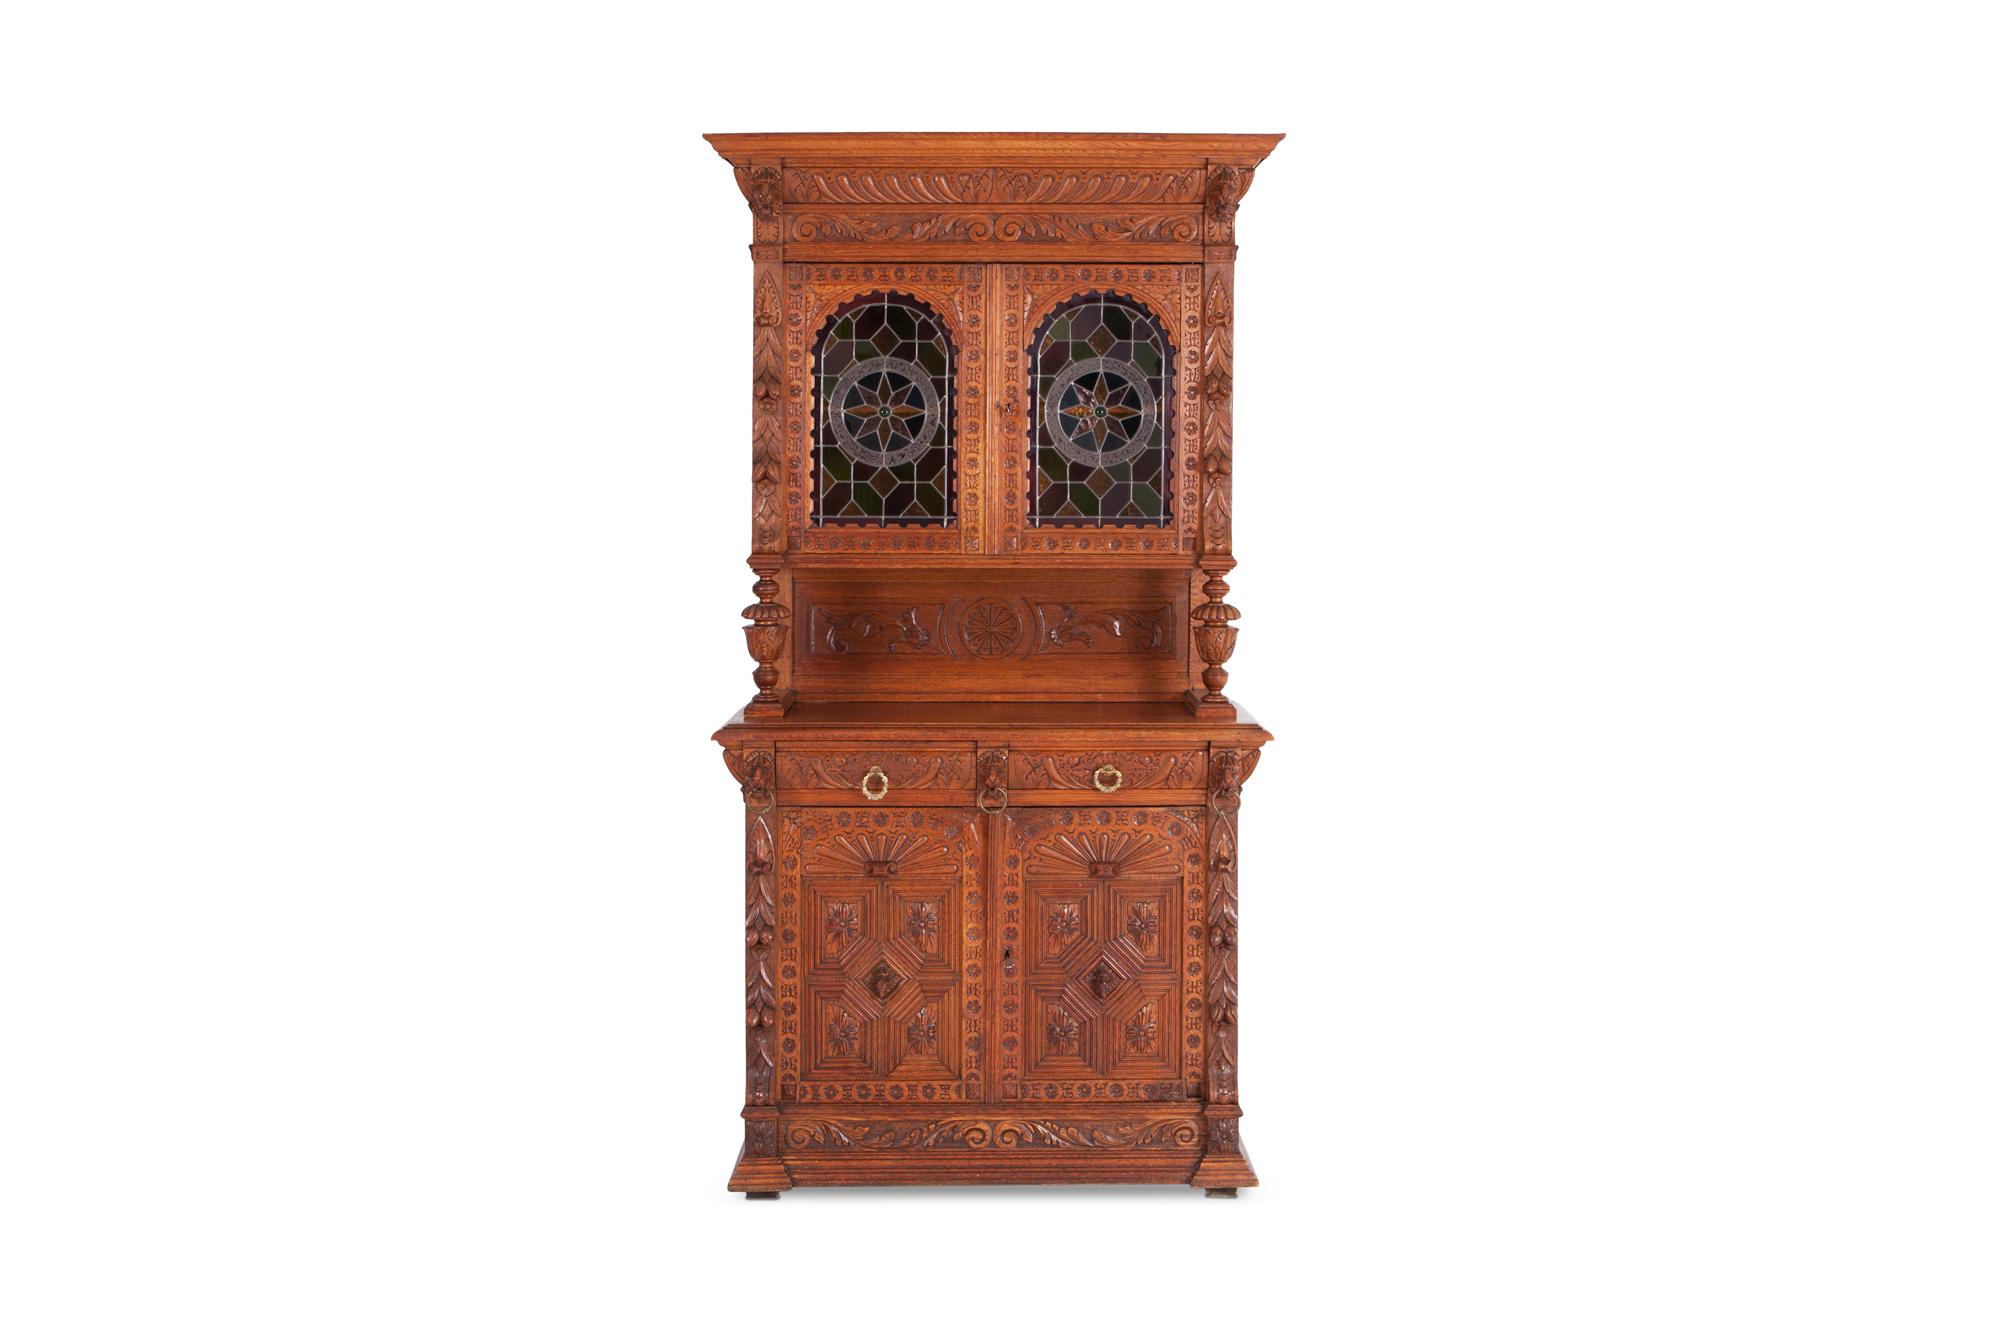 Henri II style 'double-corps' library or bookcase, made of solid oak with extraordinary fine carved details and columns.
Drawers with original brass pull. The top has glass-paned doors with colored glass.
Hand carved in Mechelen for an Antwerp